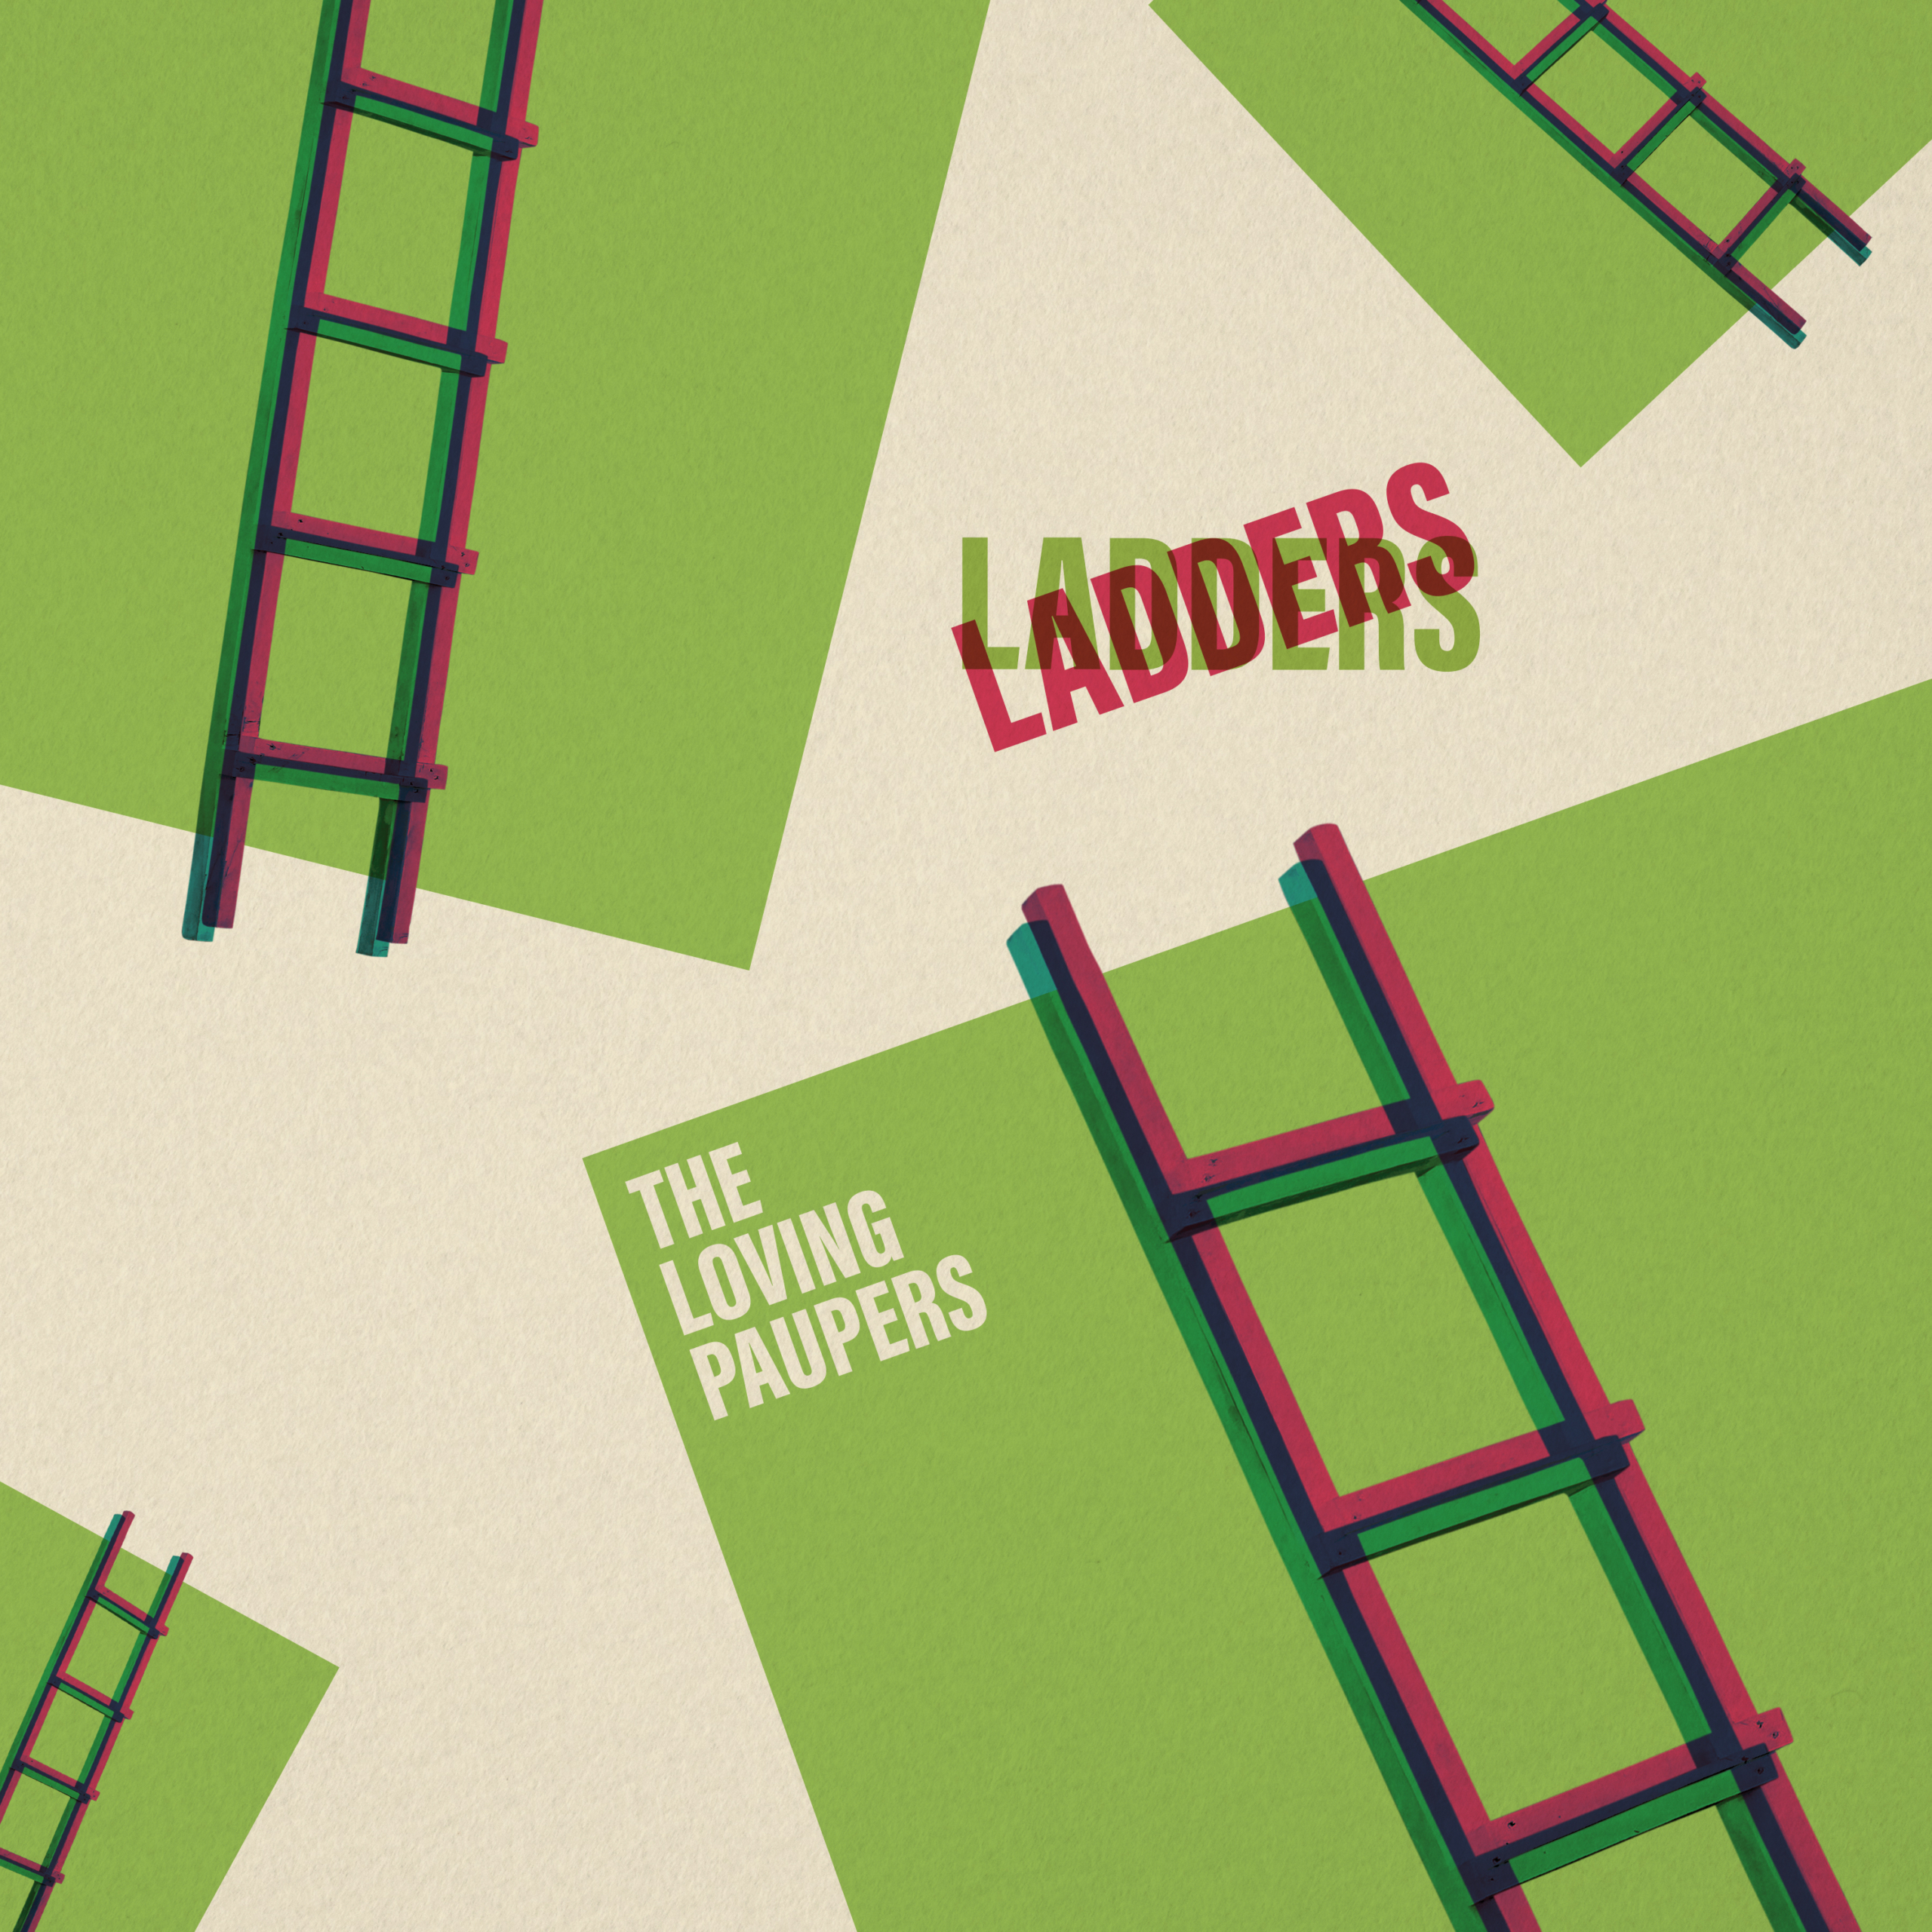 LADDERS, THE BRAND NEW ALBUM FROM THE LOVING PAUPERS RELEASES TODAY